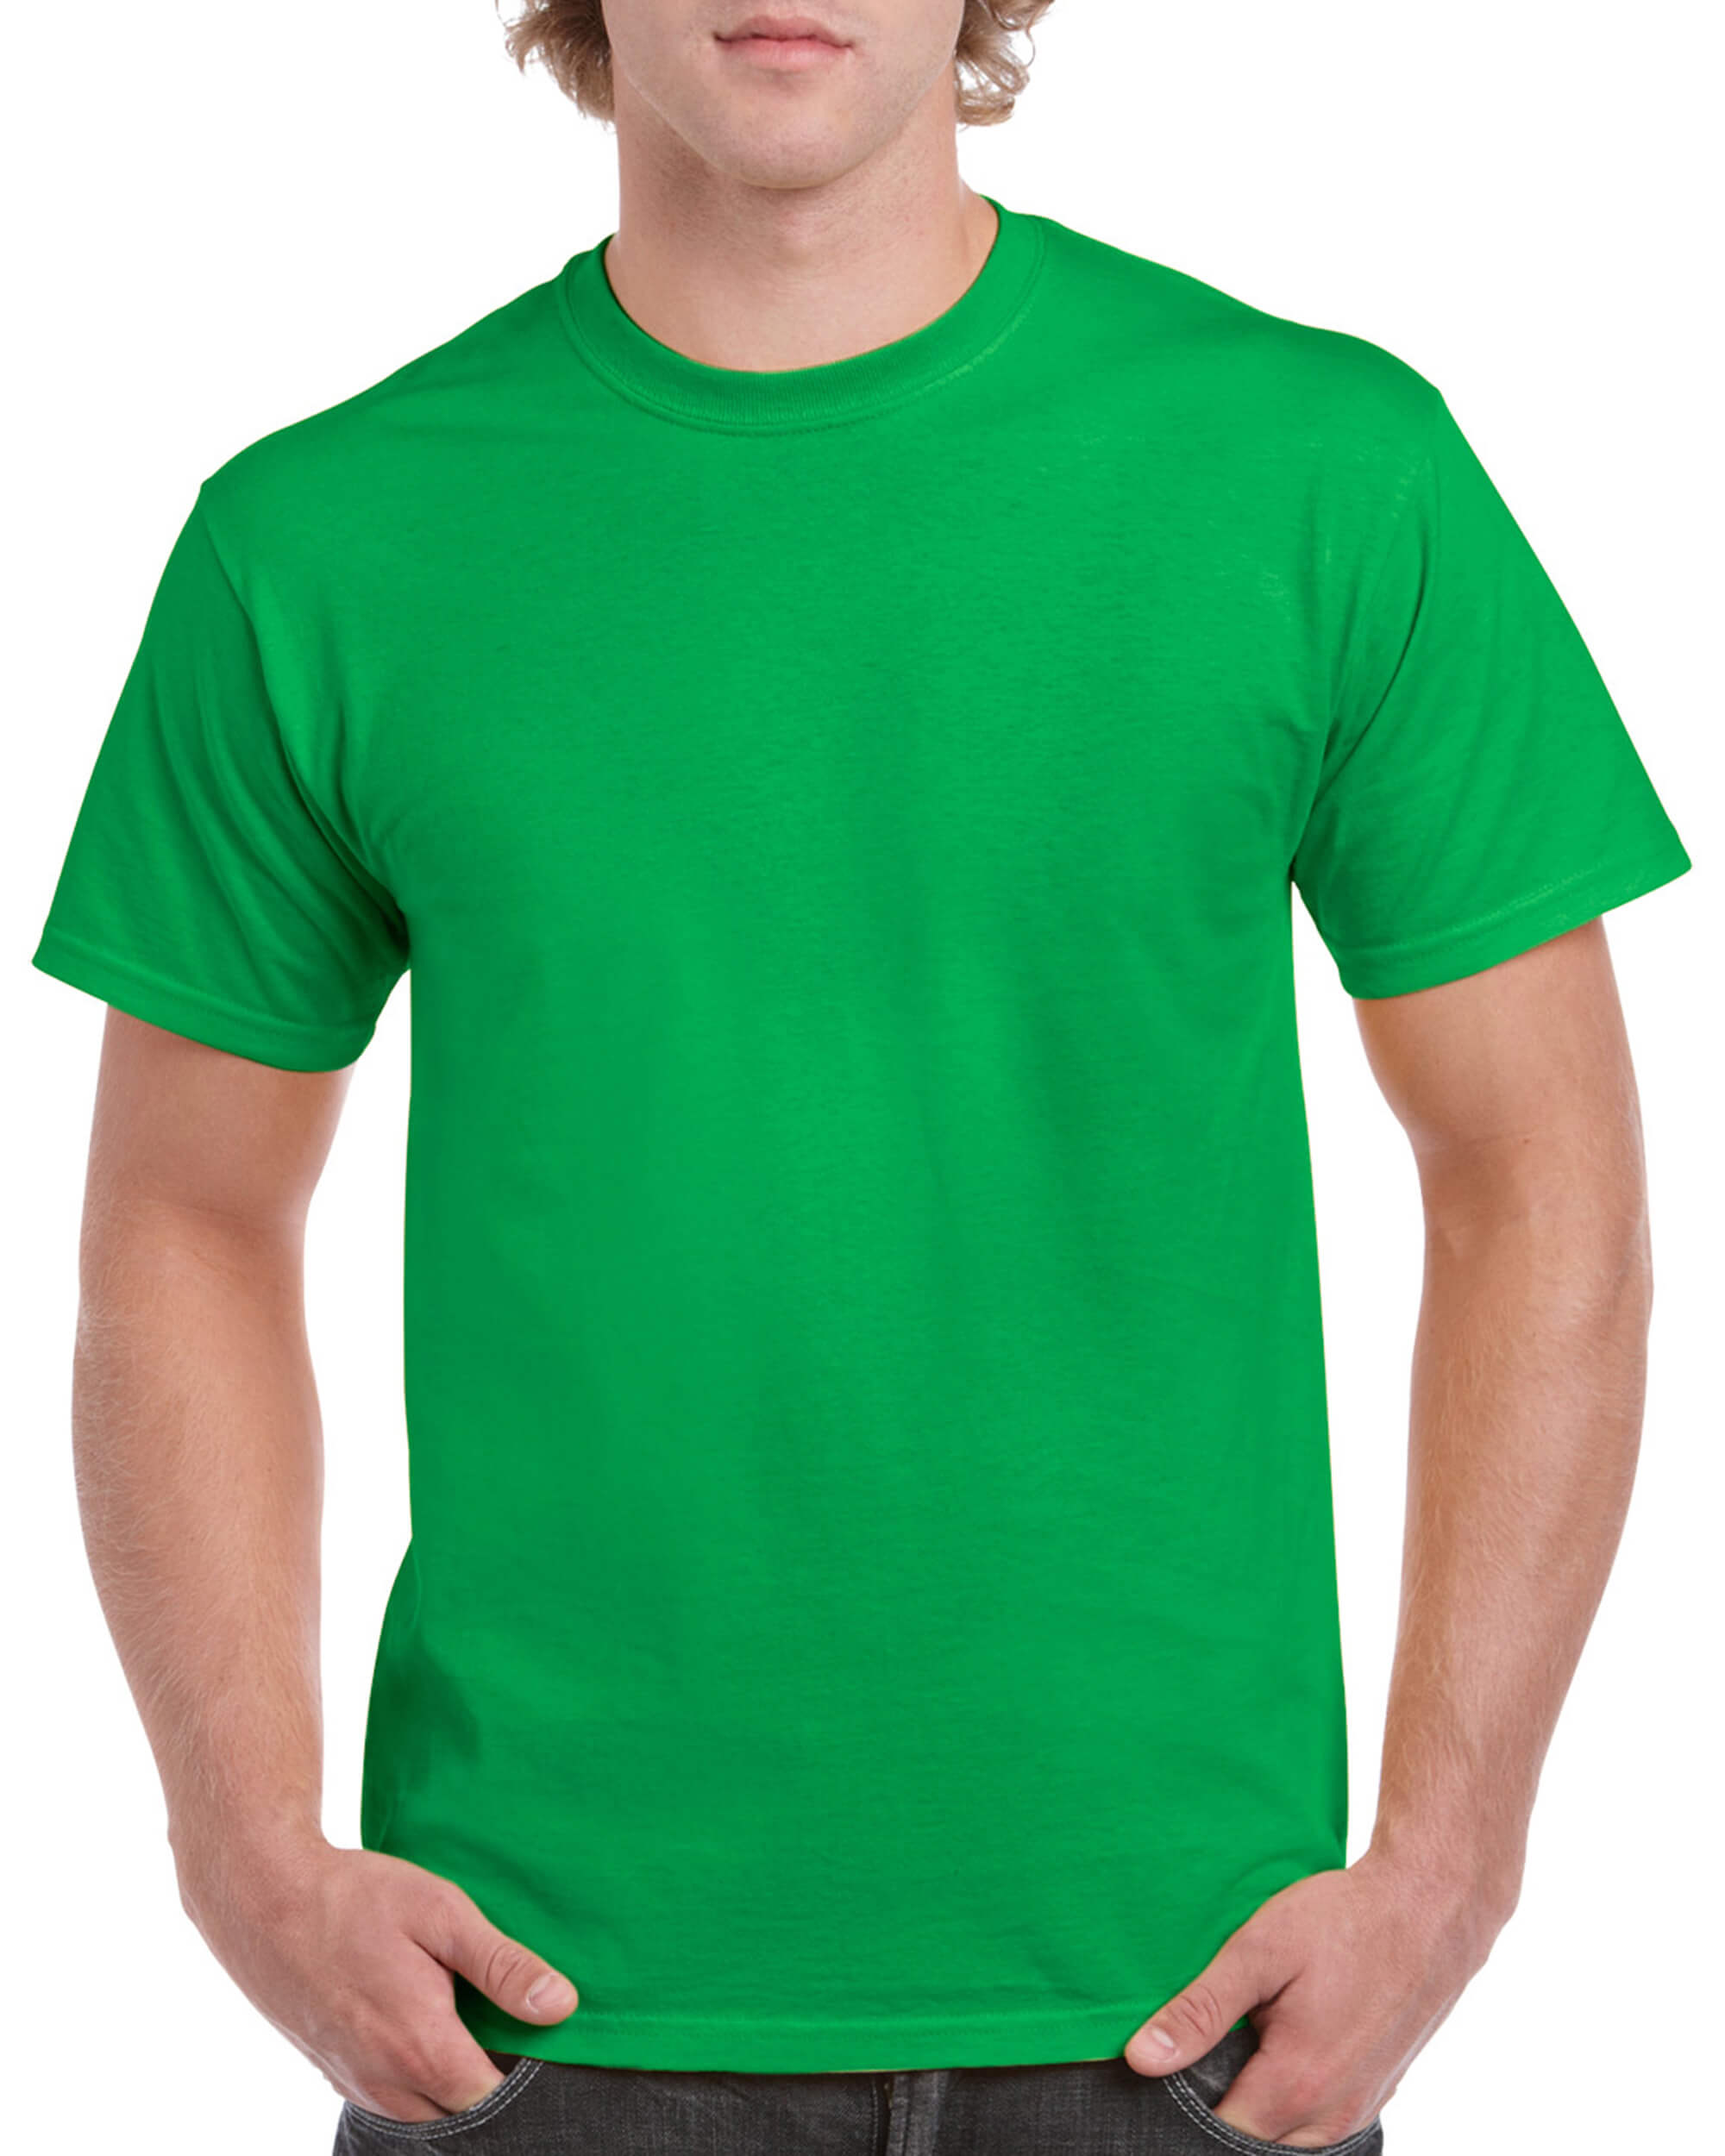 Vintage I'm A Natural Irishman T-shirt Sportswear Tag 50/50 Polyester  Cotton Made in USA Green 